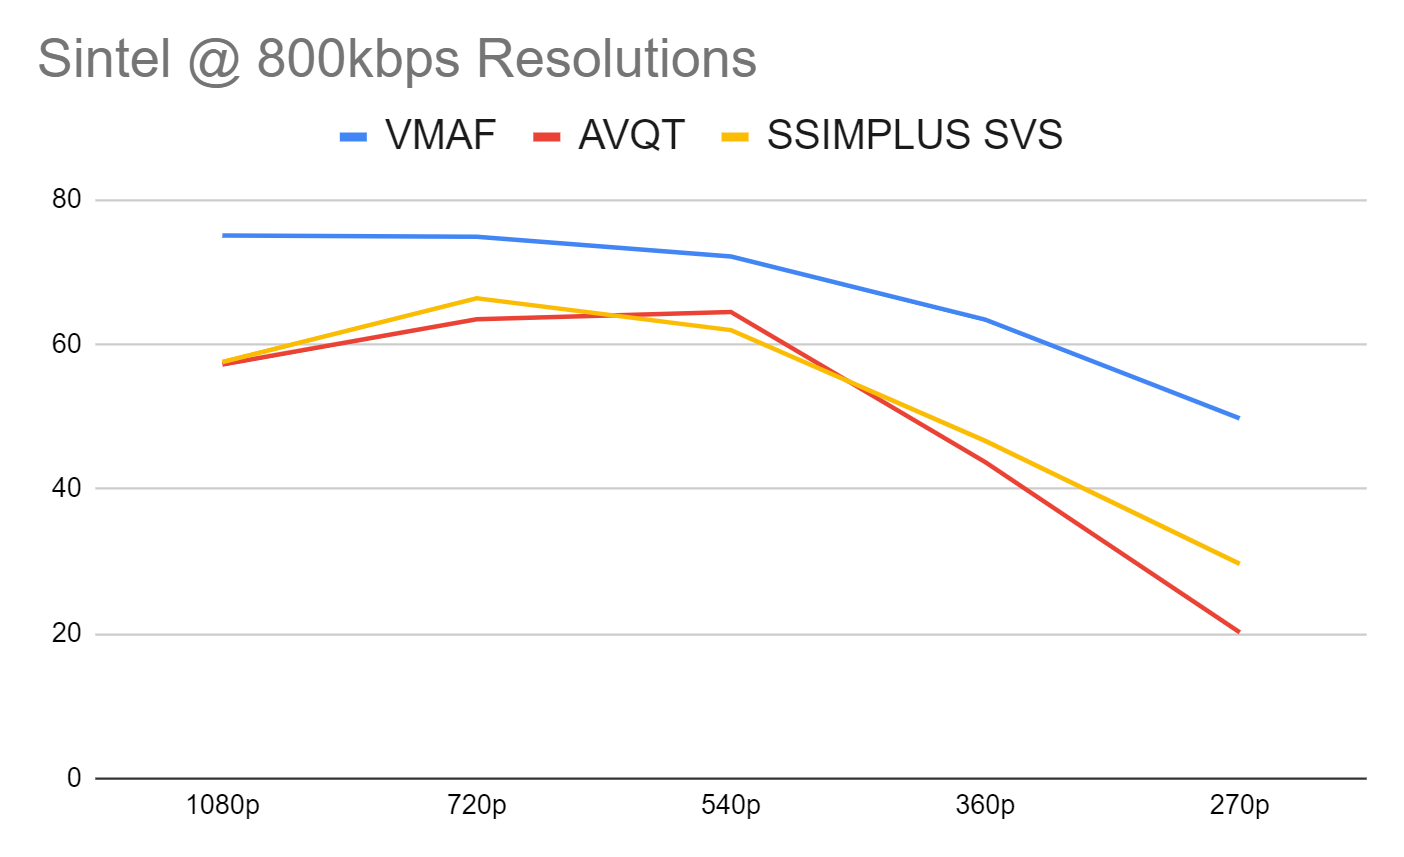 Gauging the highest quality resolution at 800 kbps in the Sintel clip using AVQT, VMAF, and SSIMPLUS.